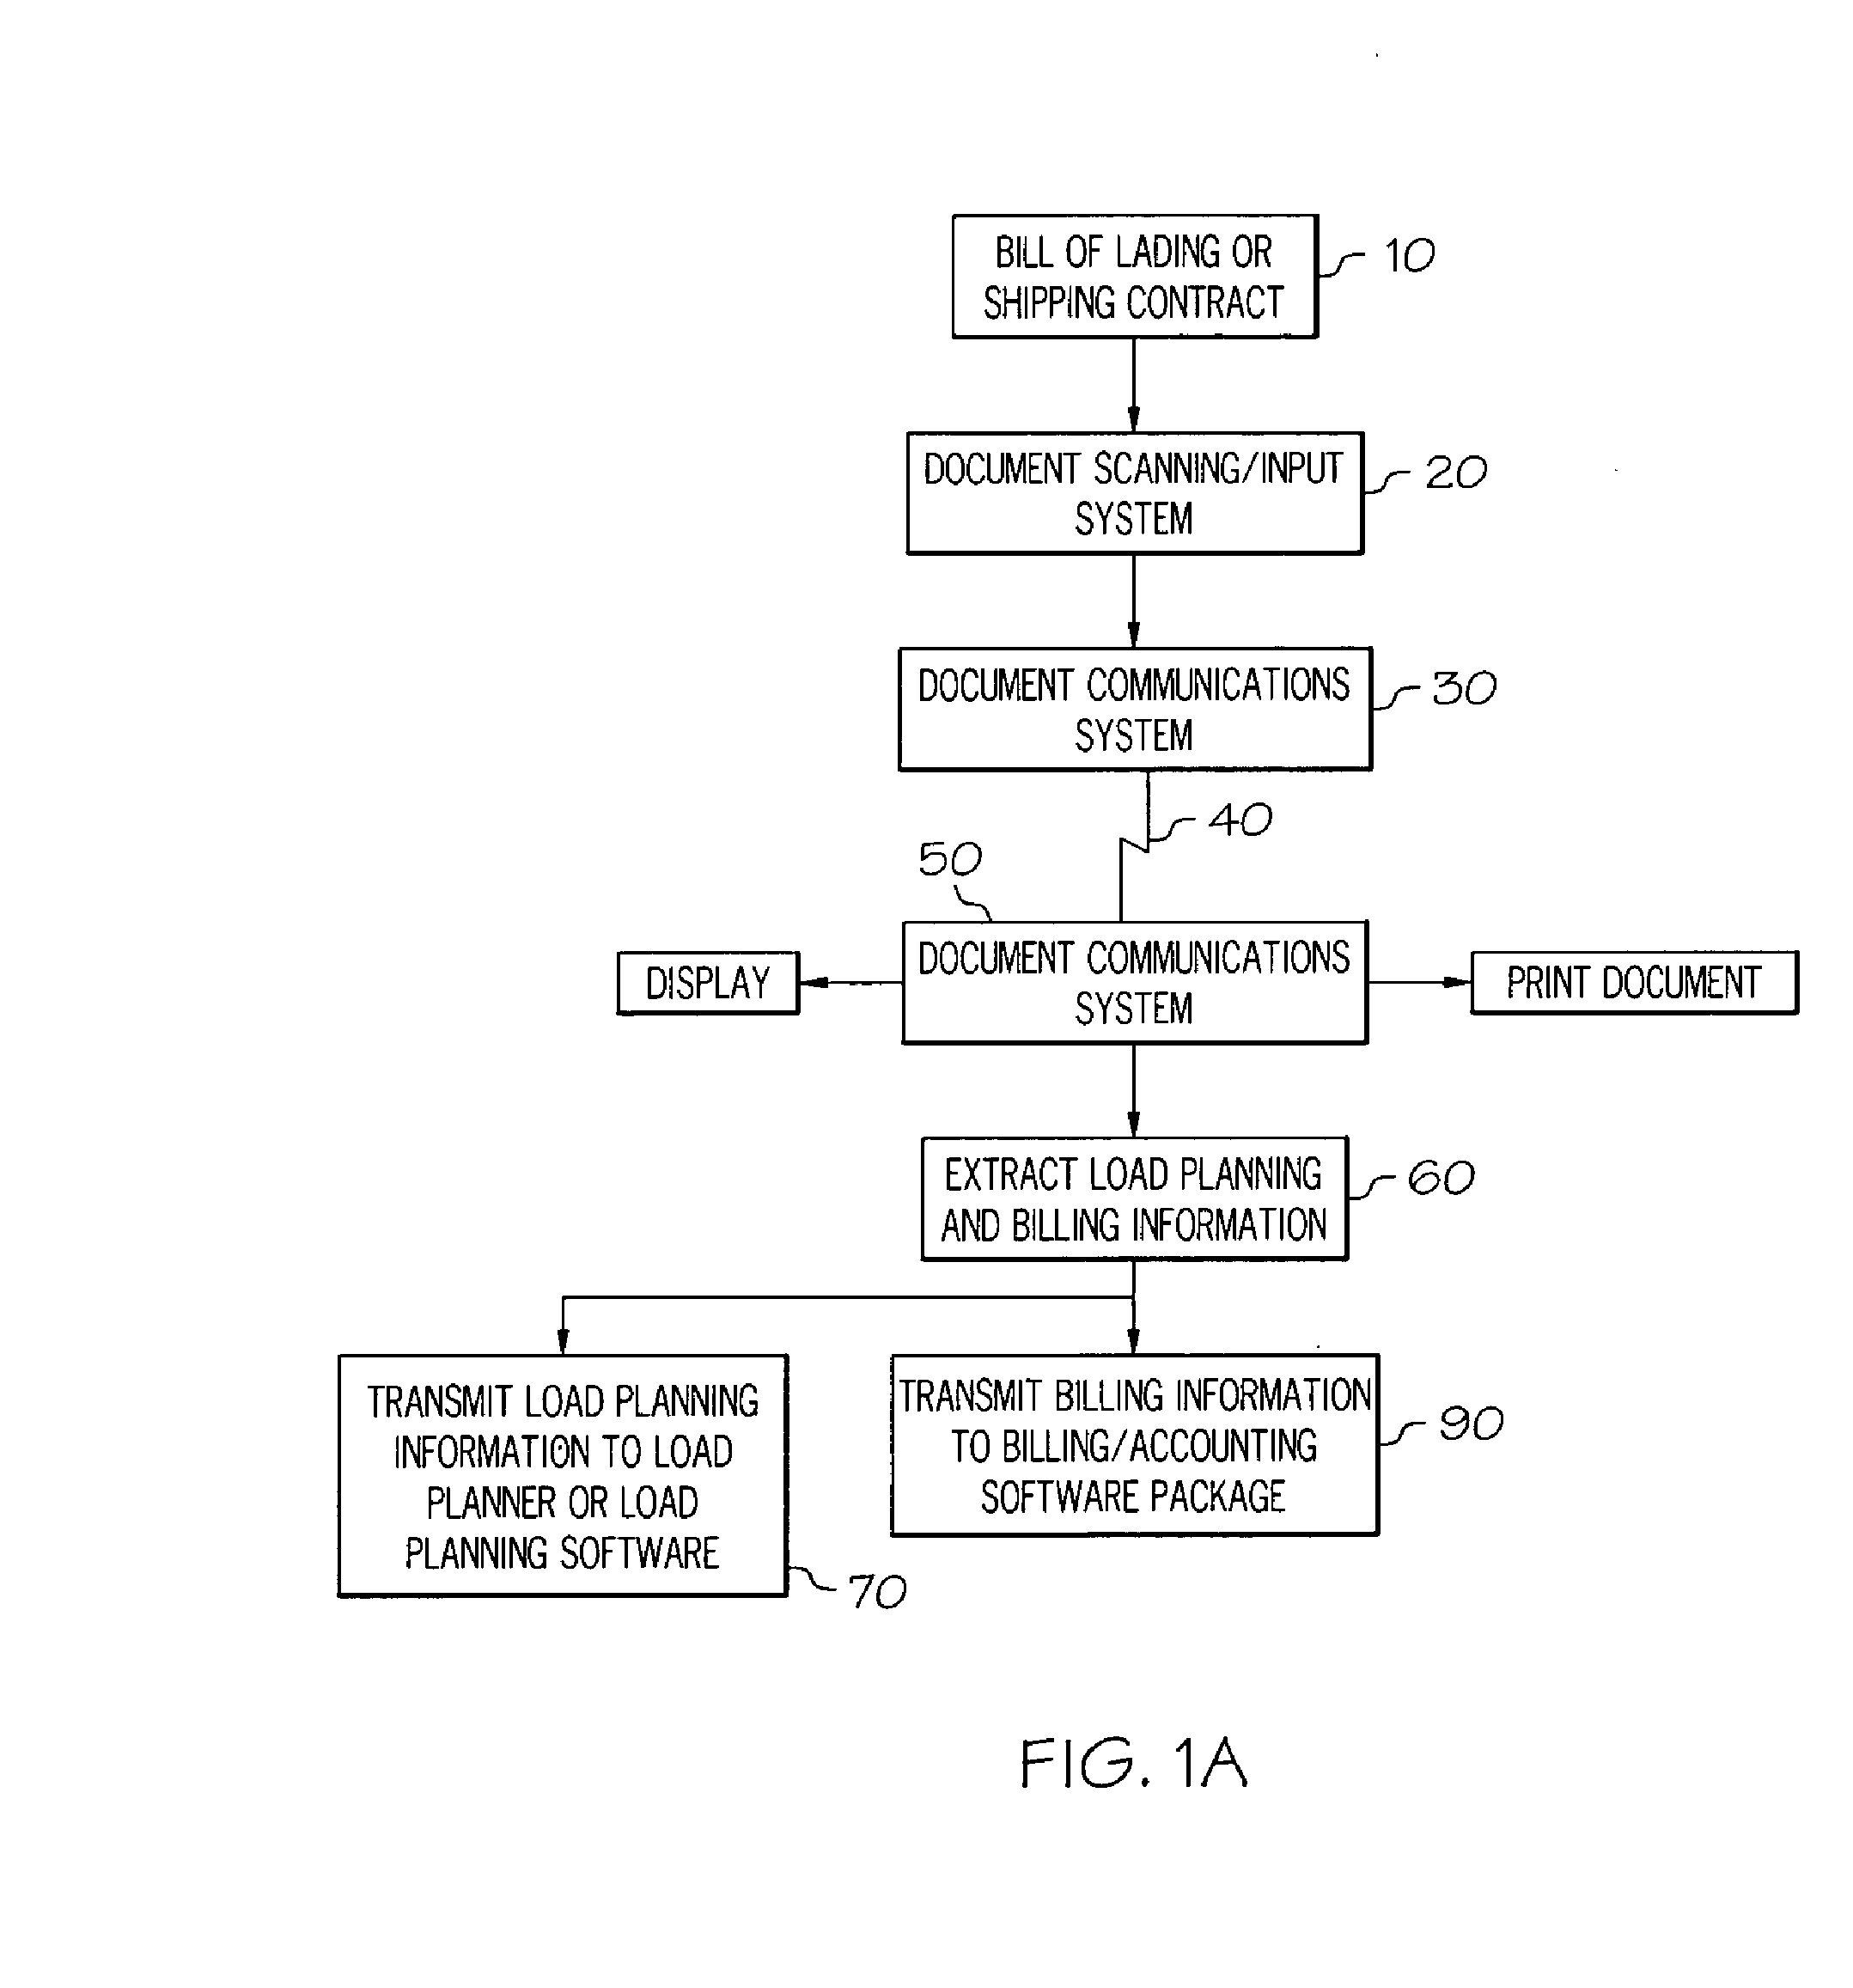 Bill of Lading Transmission and Processing System for Less Than a Load Carriers